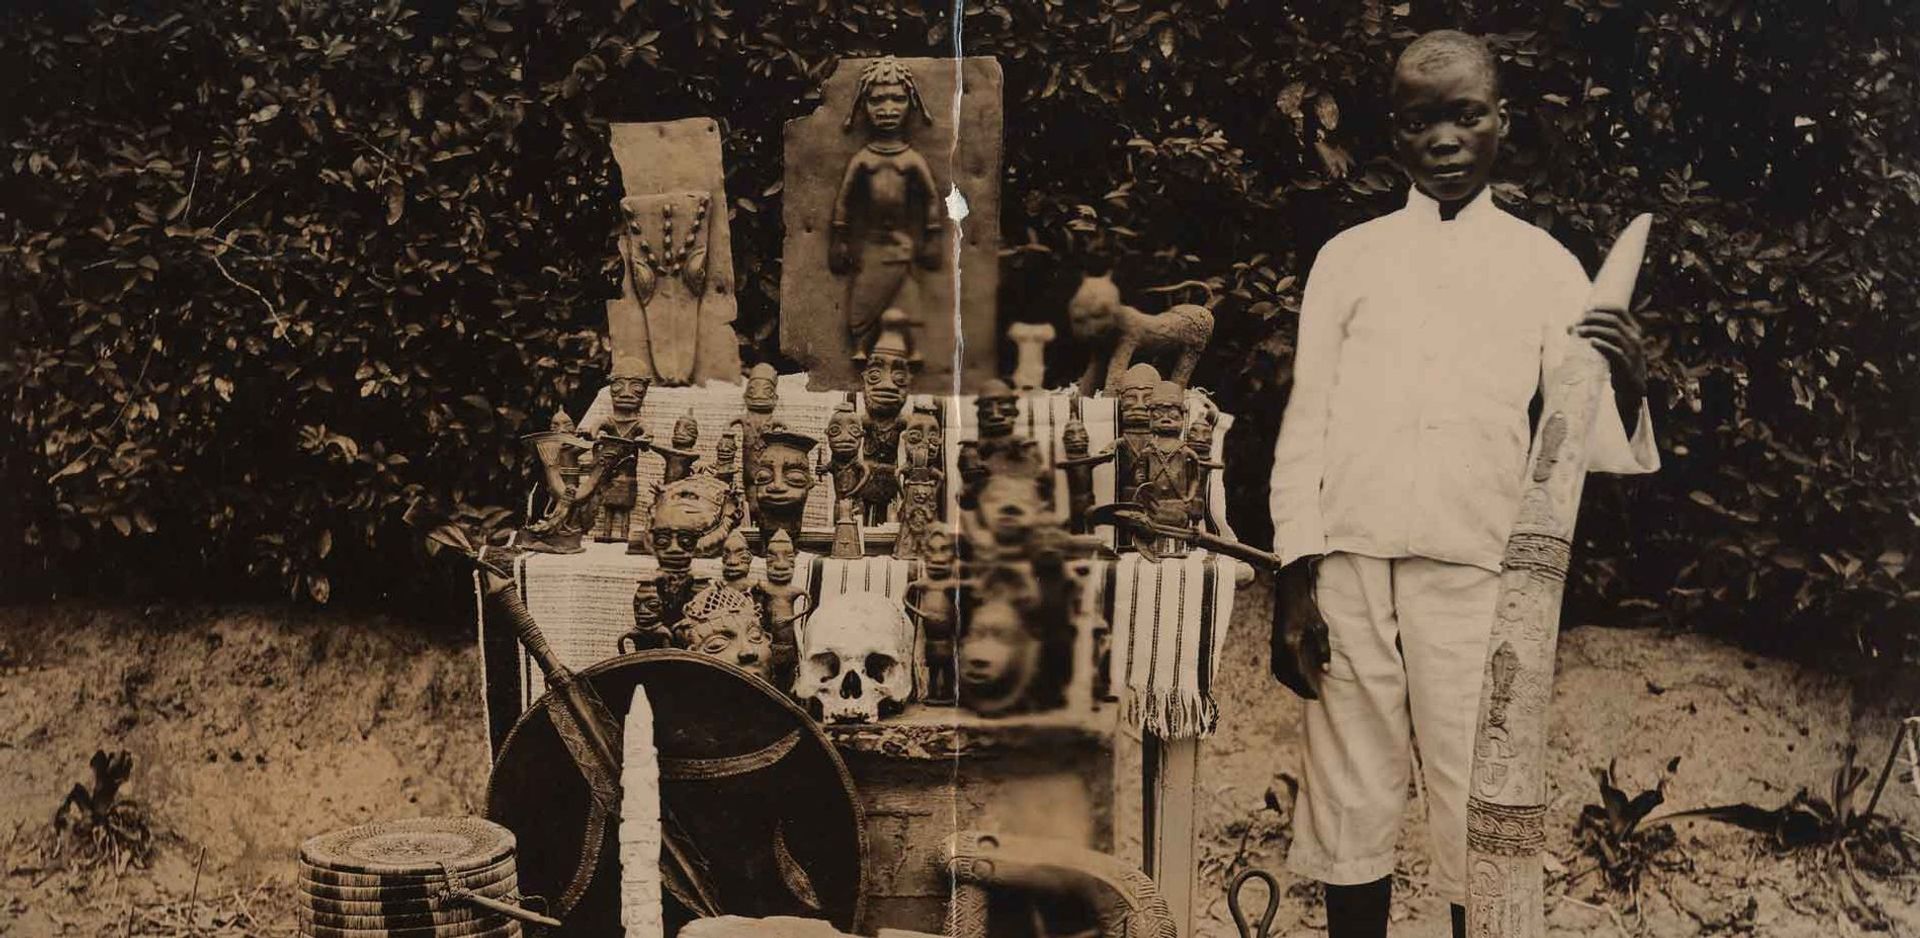 Unidentified photographer, A son of Chief Eholla in Nigeria with objects from the Benin Kingdom (1900-02) © Ethnologisches Museum Berlin